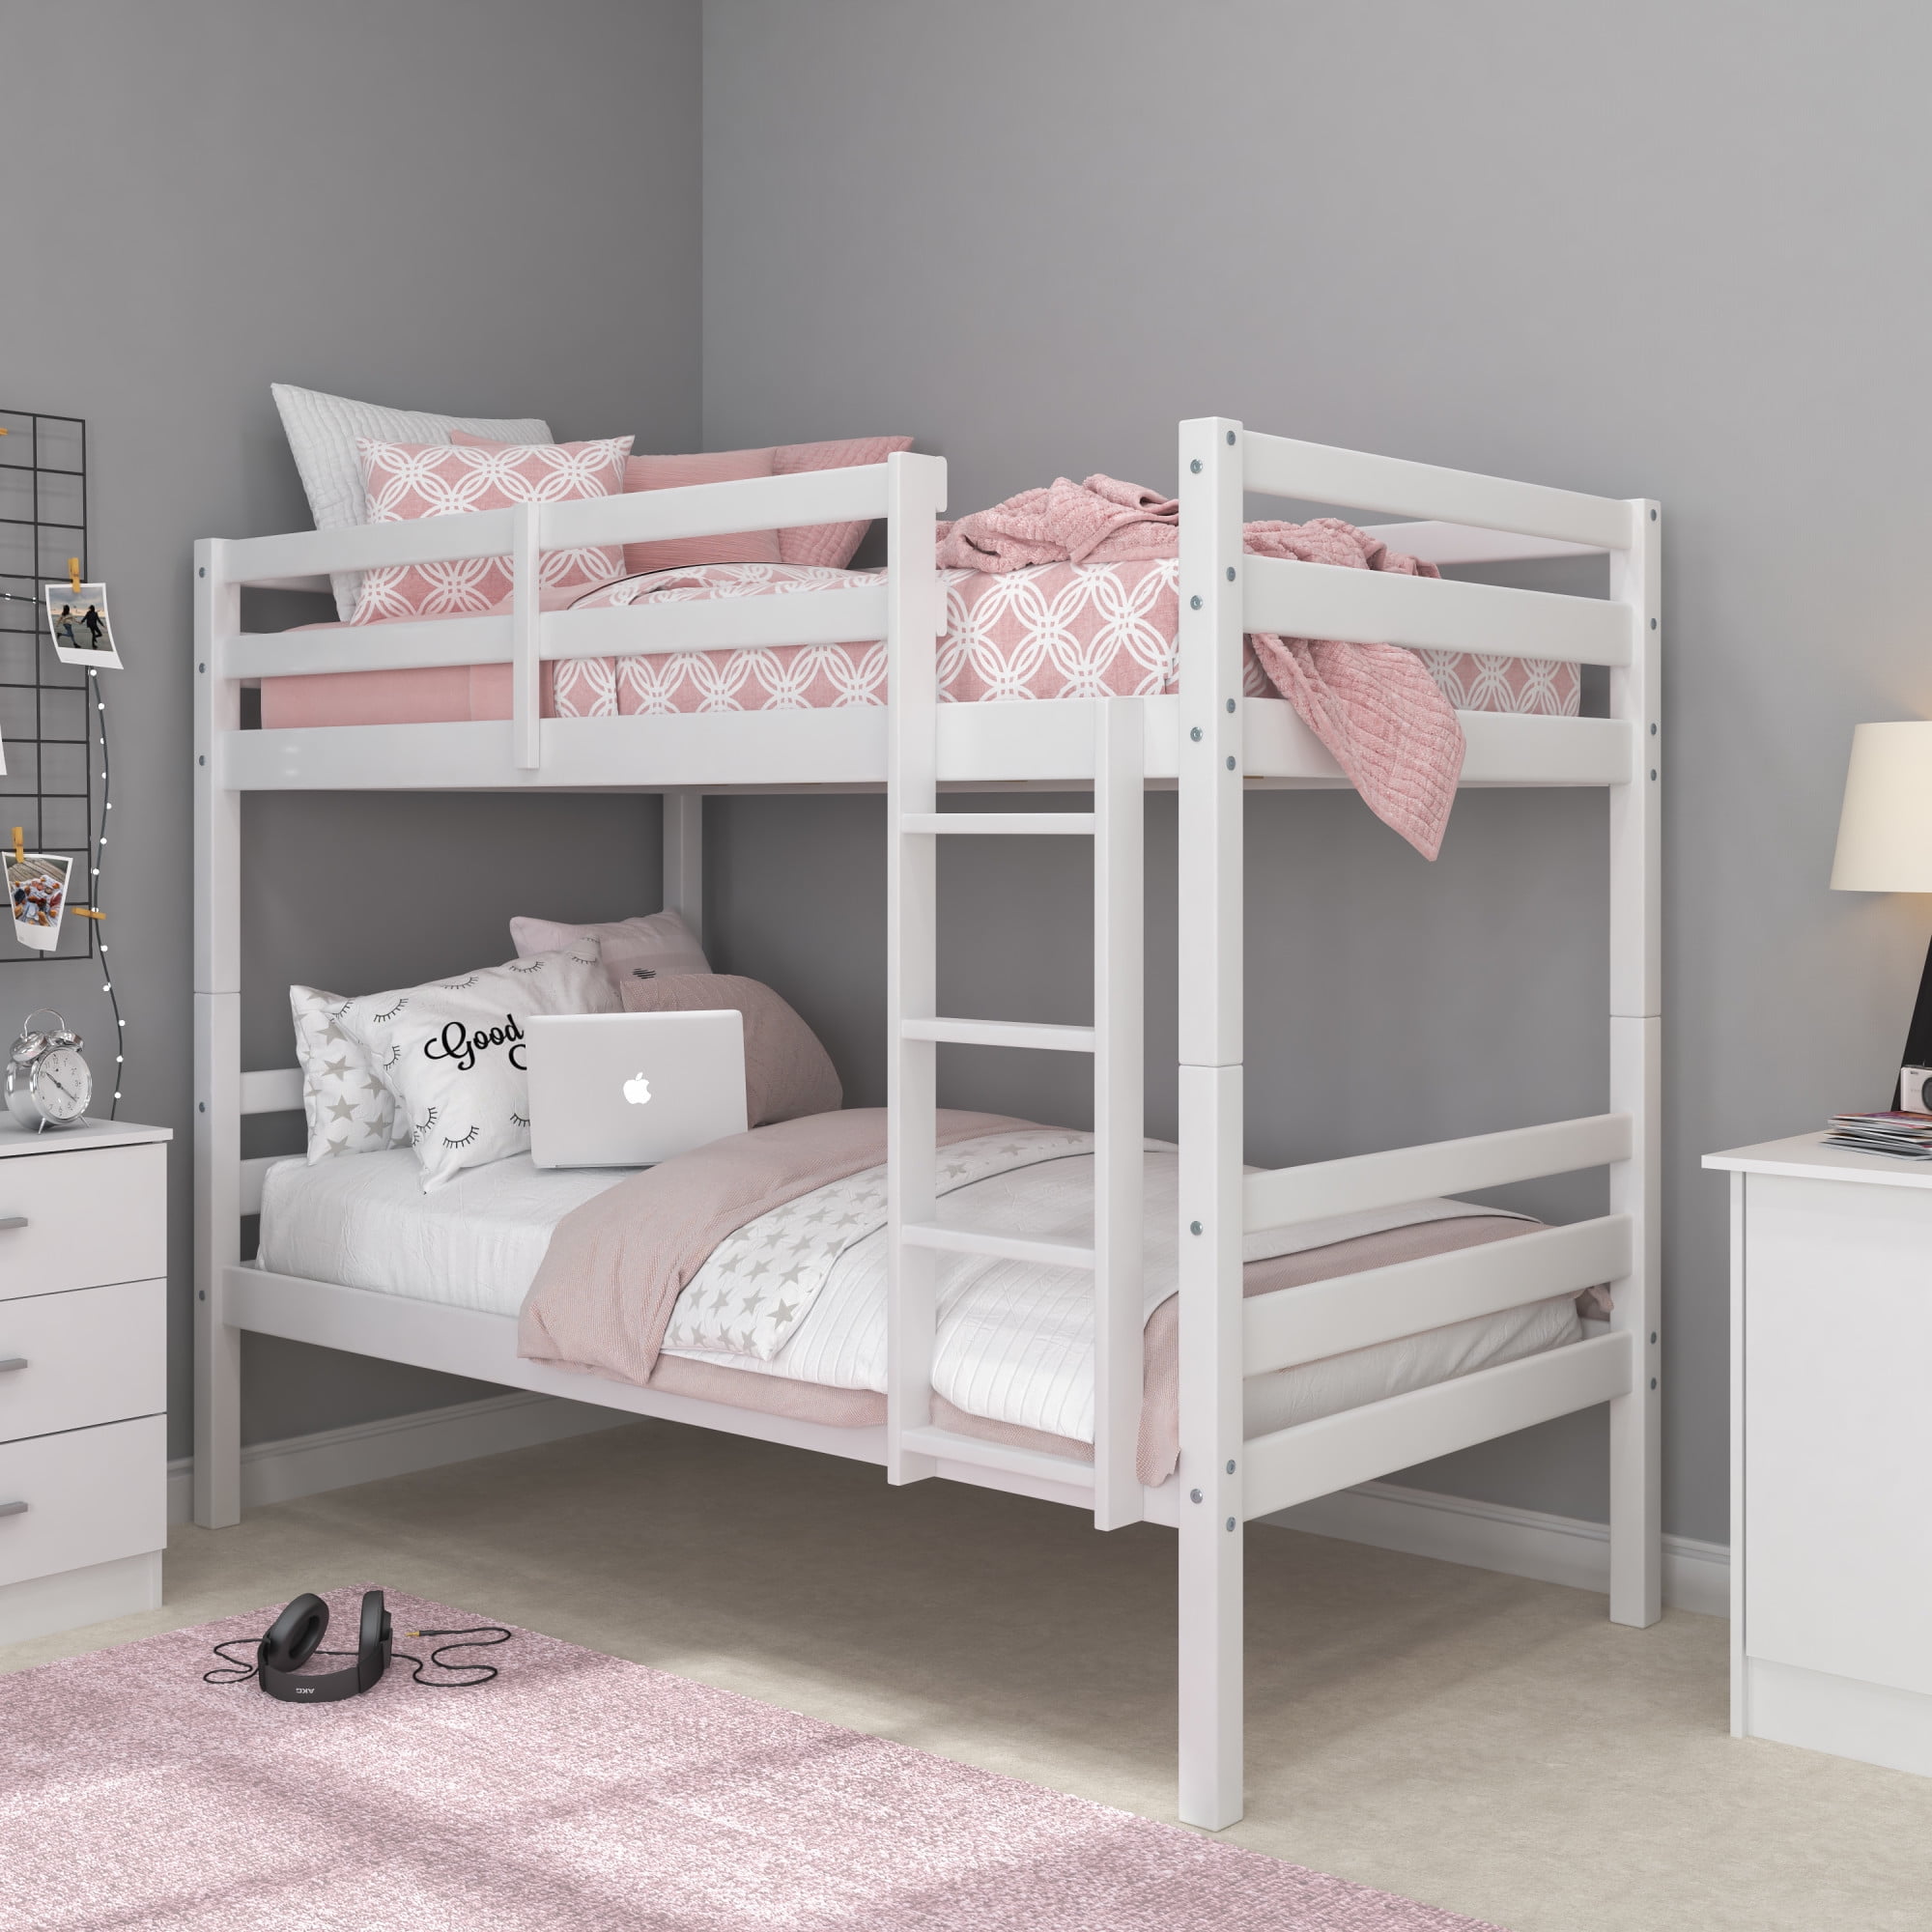 Campbell Wood Twin Over Bunk Bed, Twin Bunk Beds